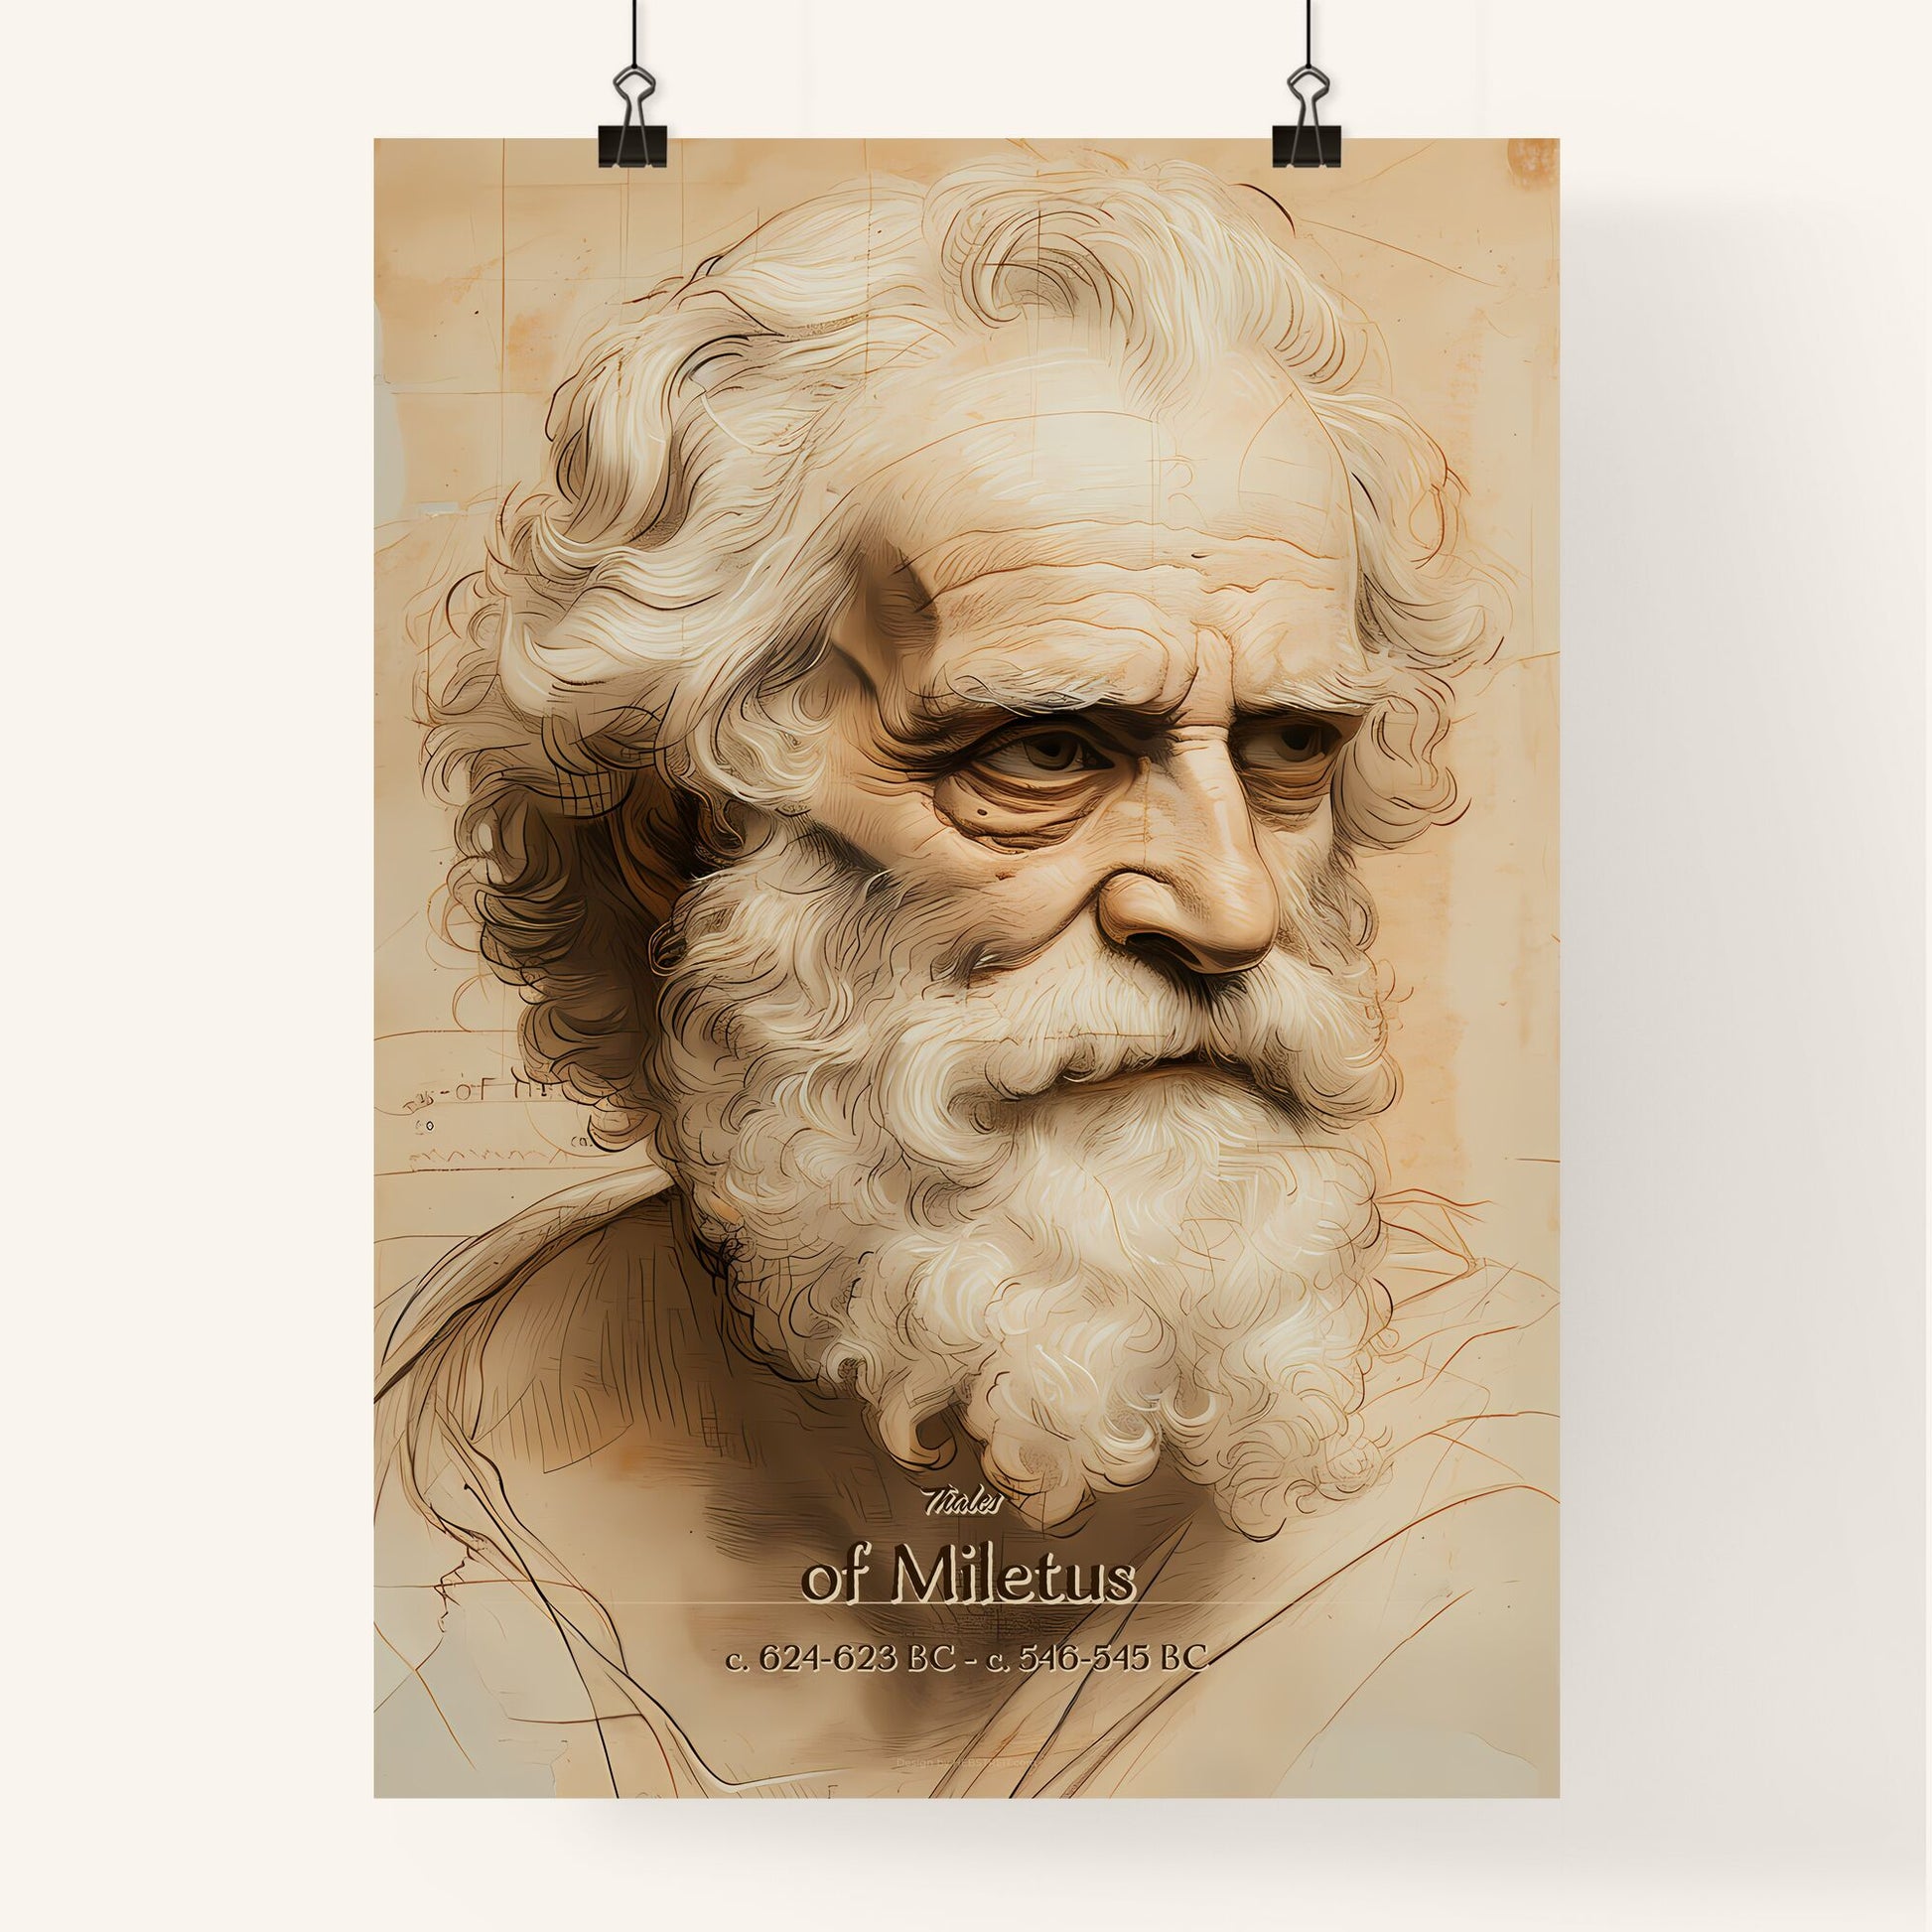 Thales, of Miletus, c. 624-623 BC - c. 546-545 BC, A Poster of a drawing of a man with a beard Default Title